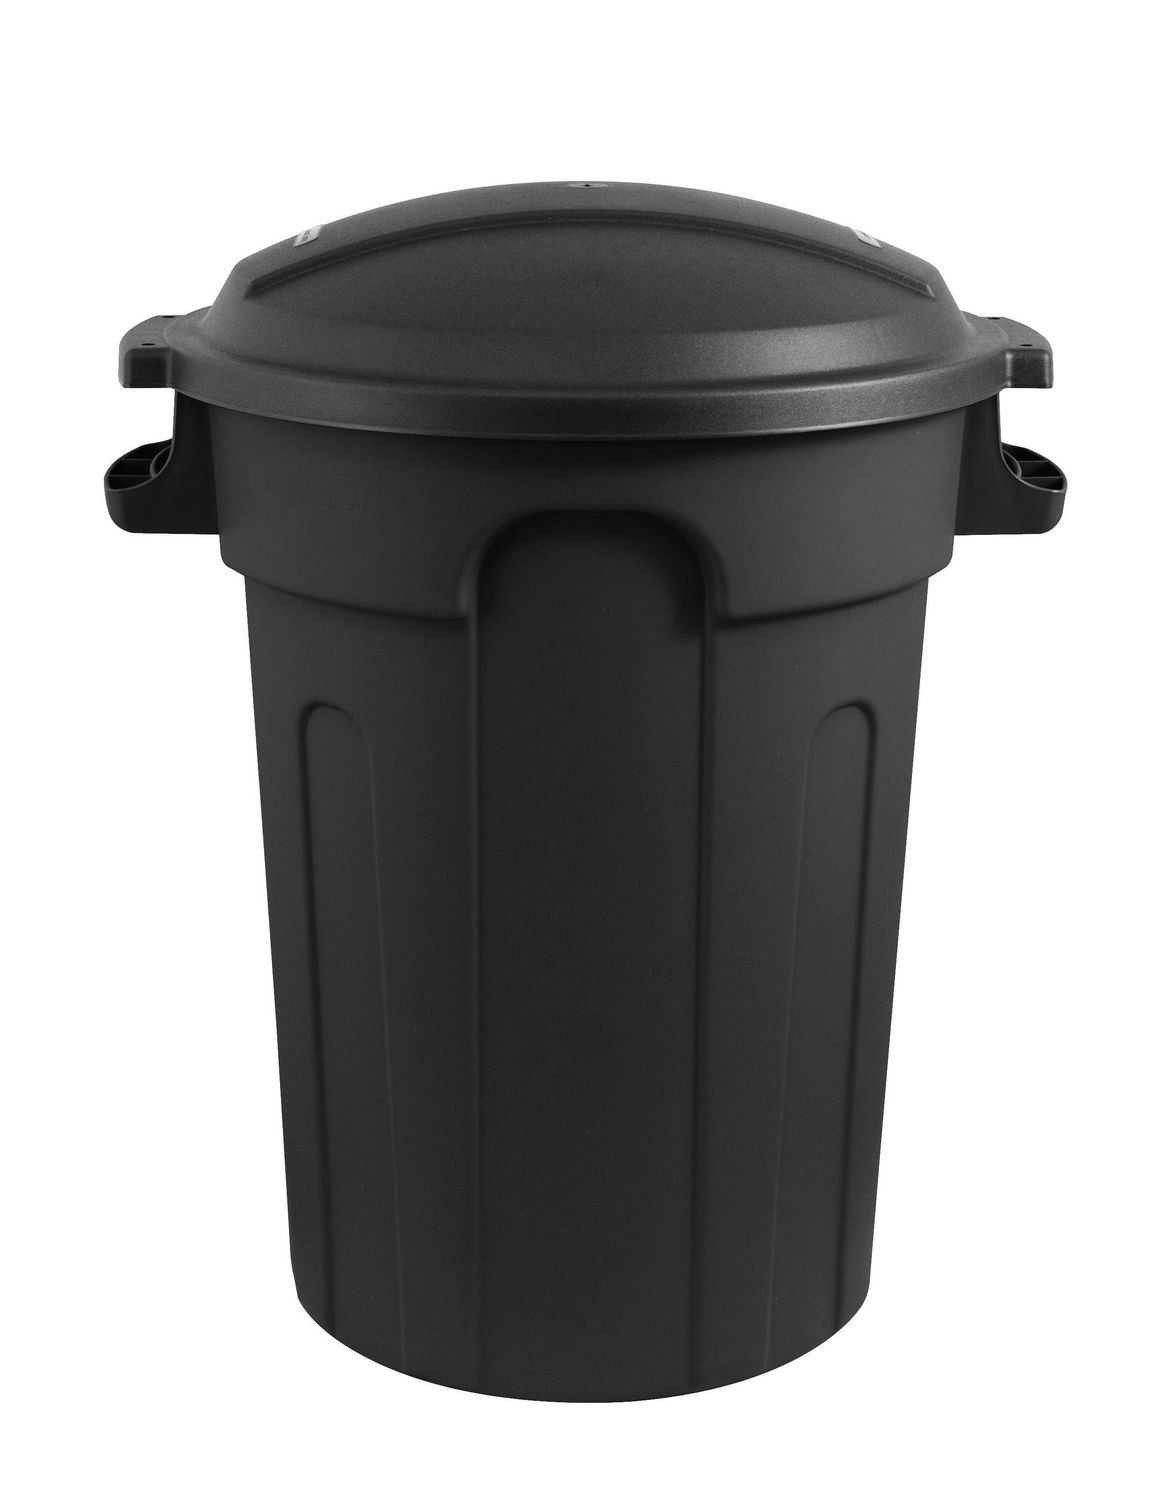 Gracious Living Garbage Container with domed lid